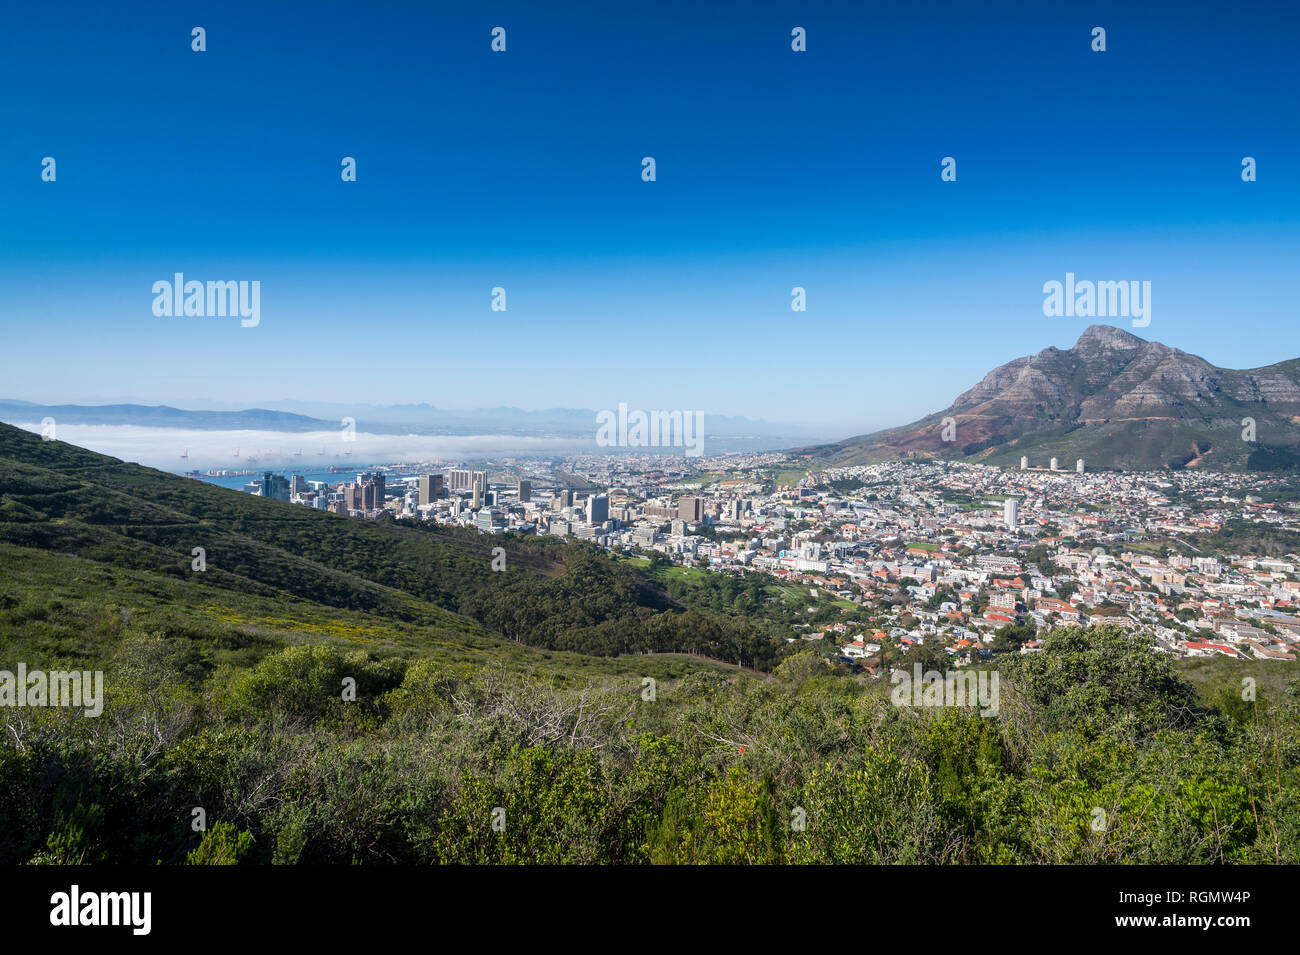 South Africa, Cape Town, city view Stock Photo